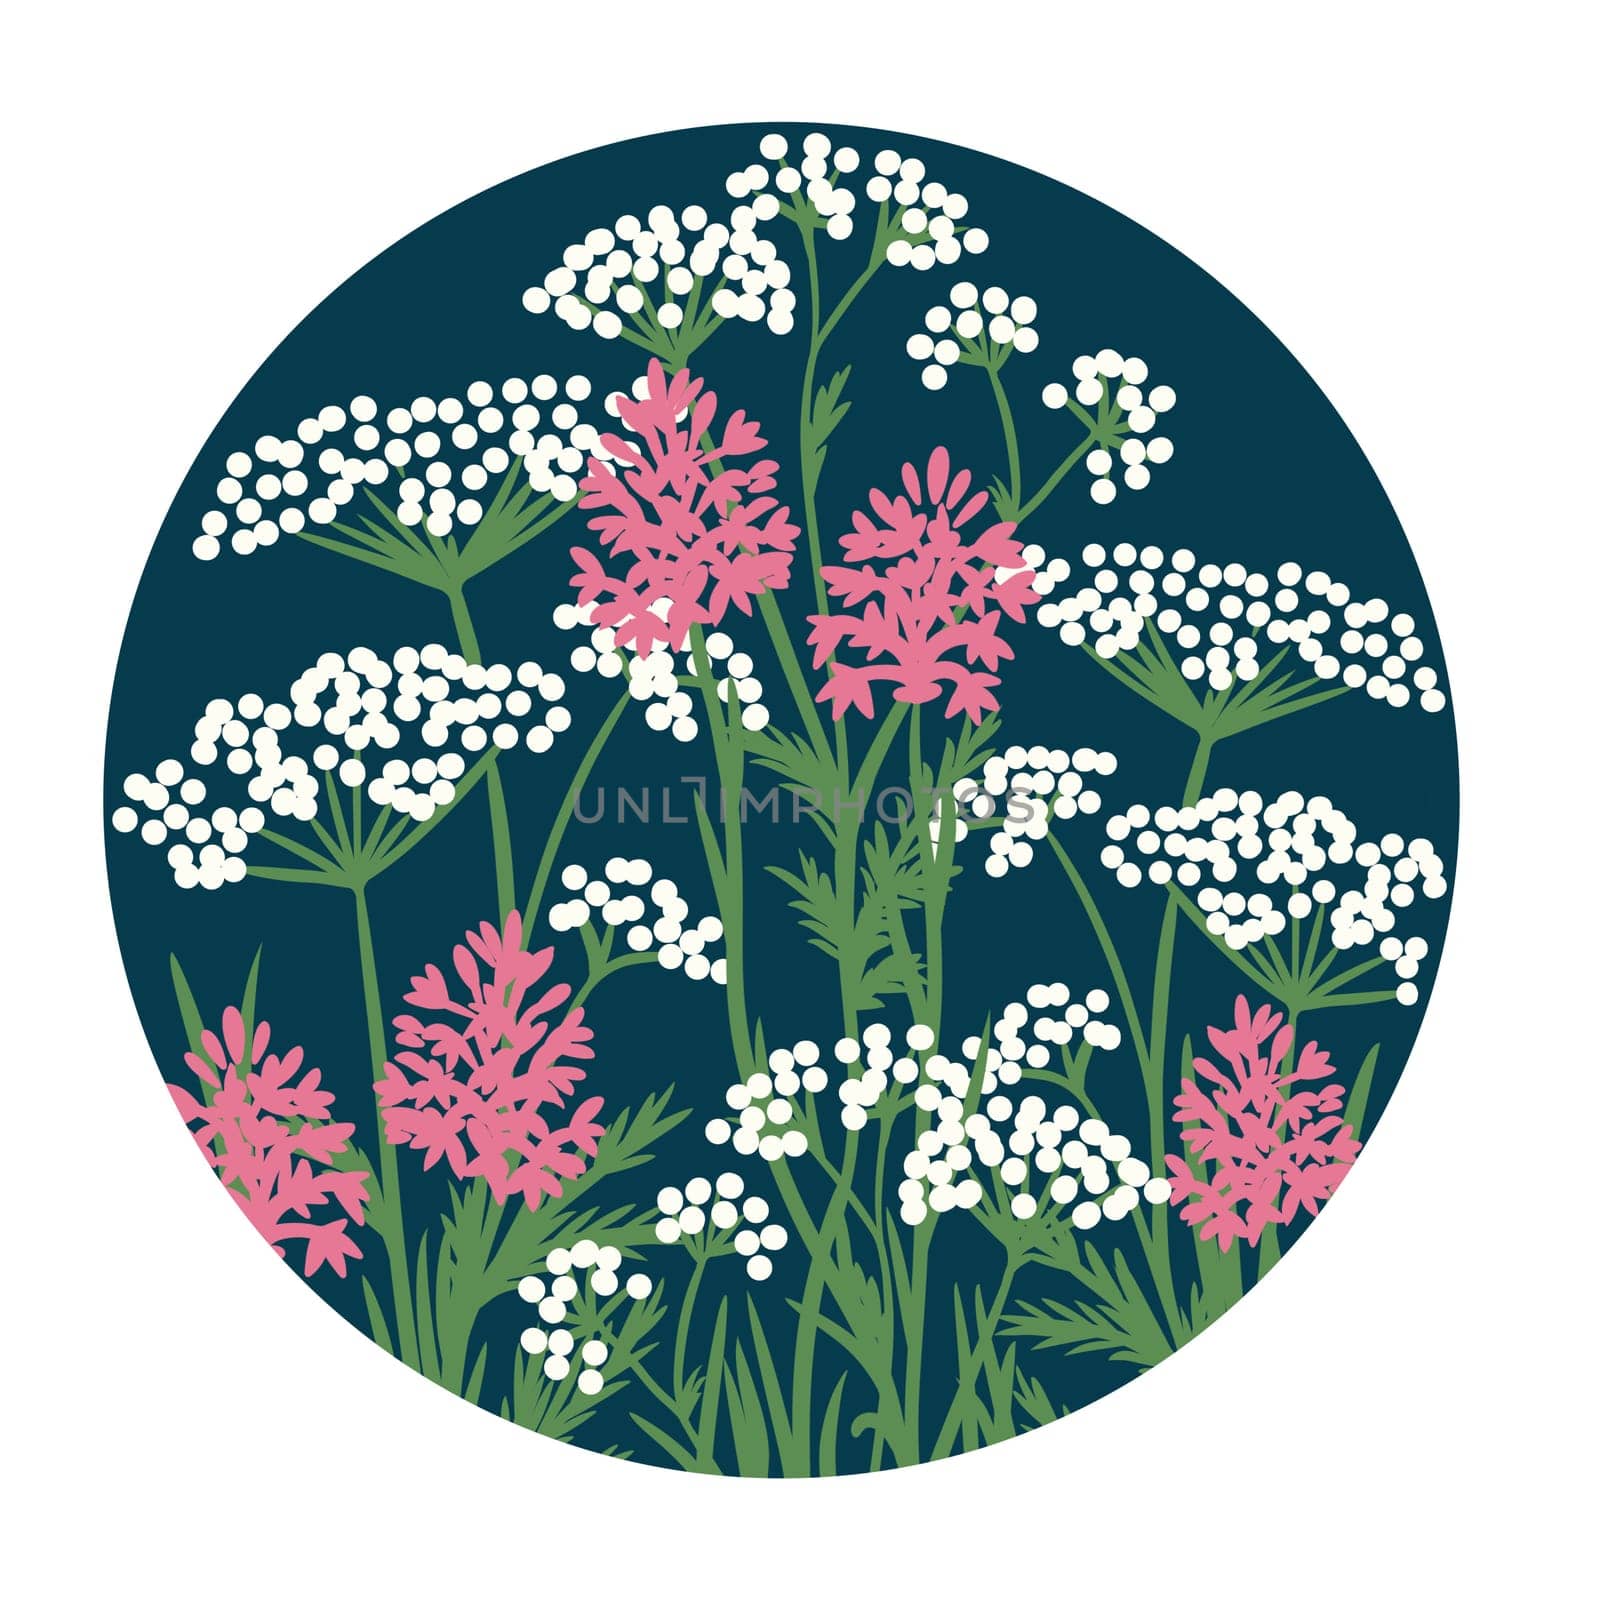 Hand drawn illustration of white cow parsley pink pyramidal orchid meadow wild flowers, wildflower floral design. Round circle nature plant on dark blue navy indigo background, british common herbs grass. by Lagmar